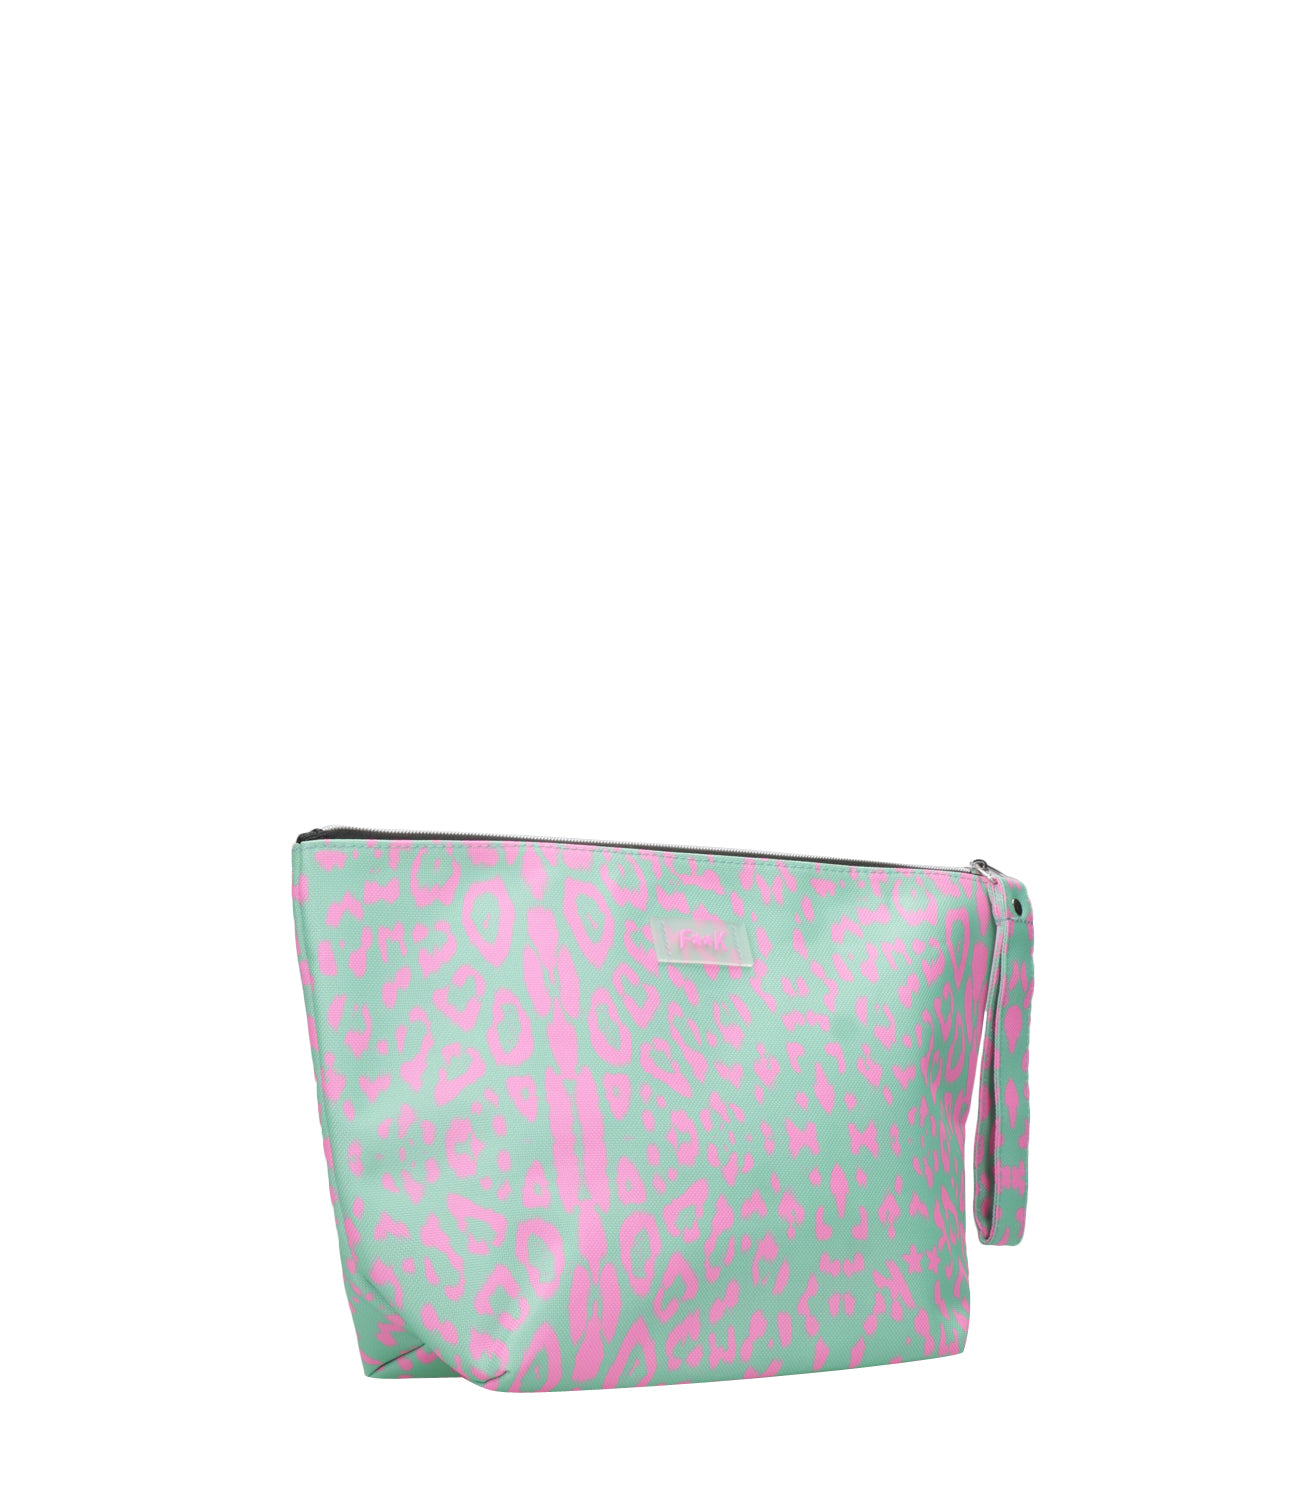 F**K Project | Maxi Water and Pink Clutch Bag